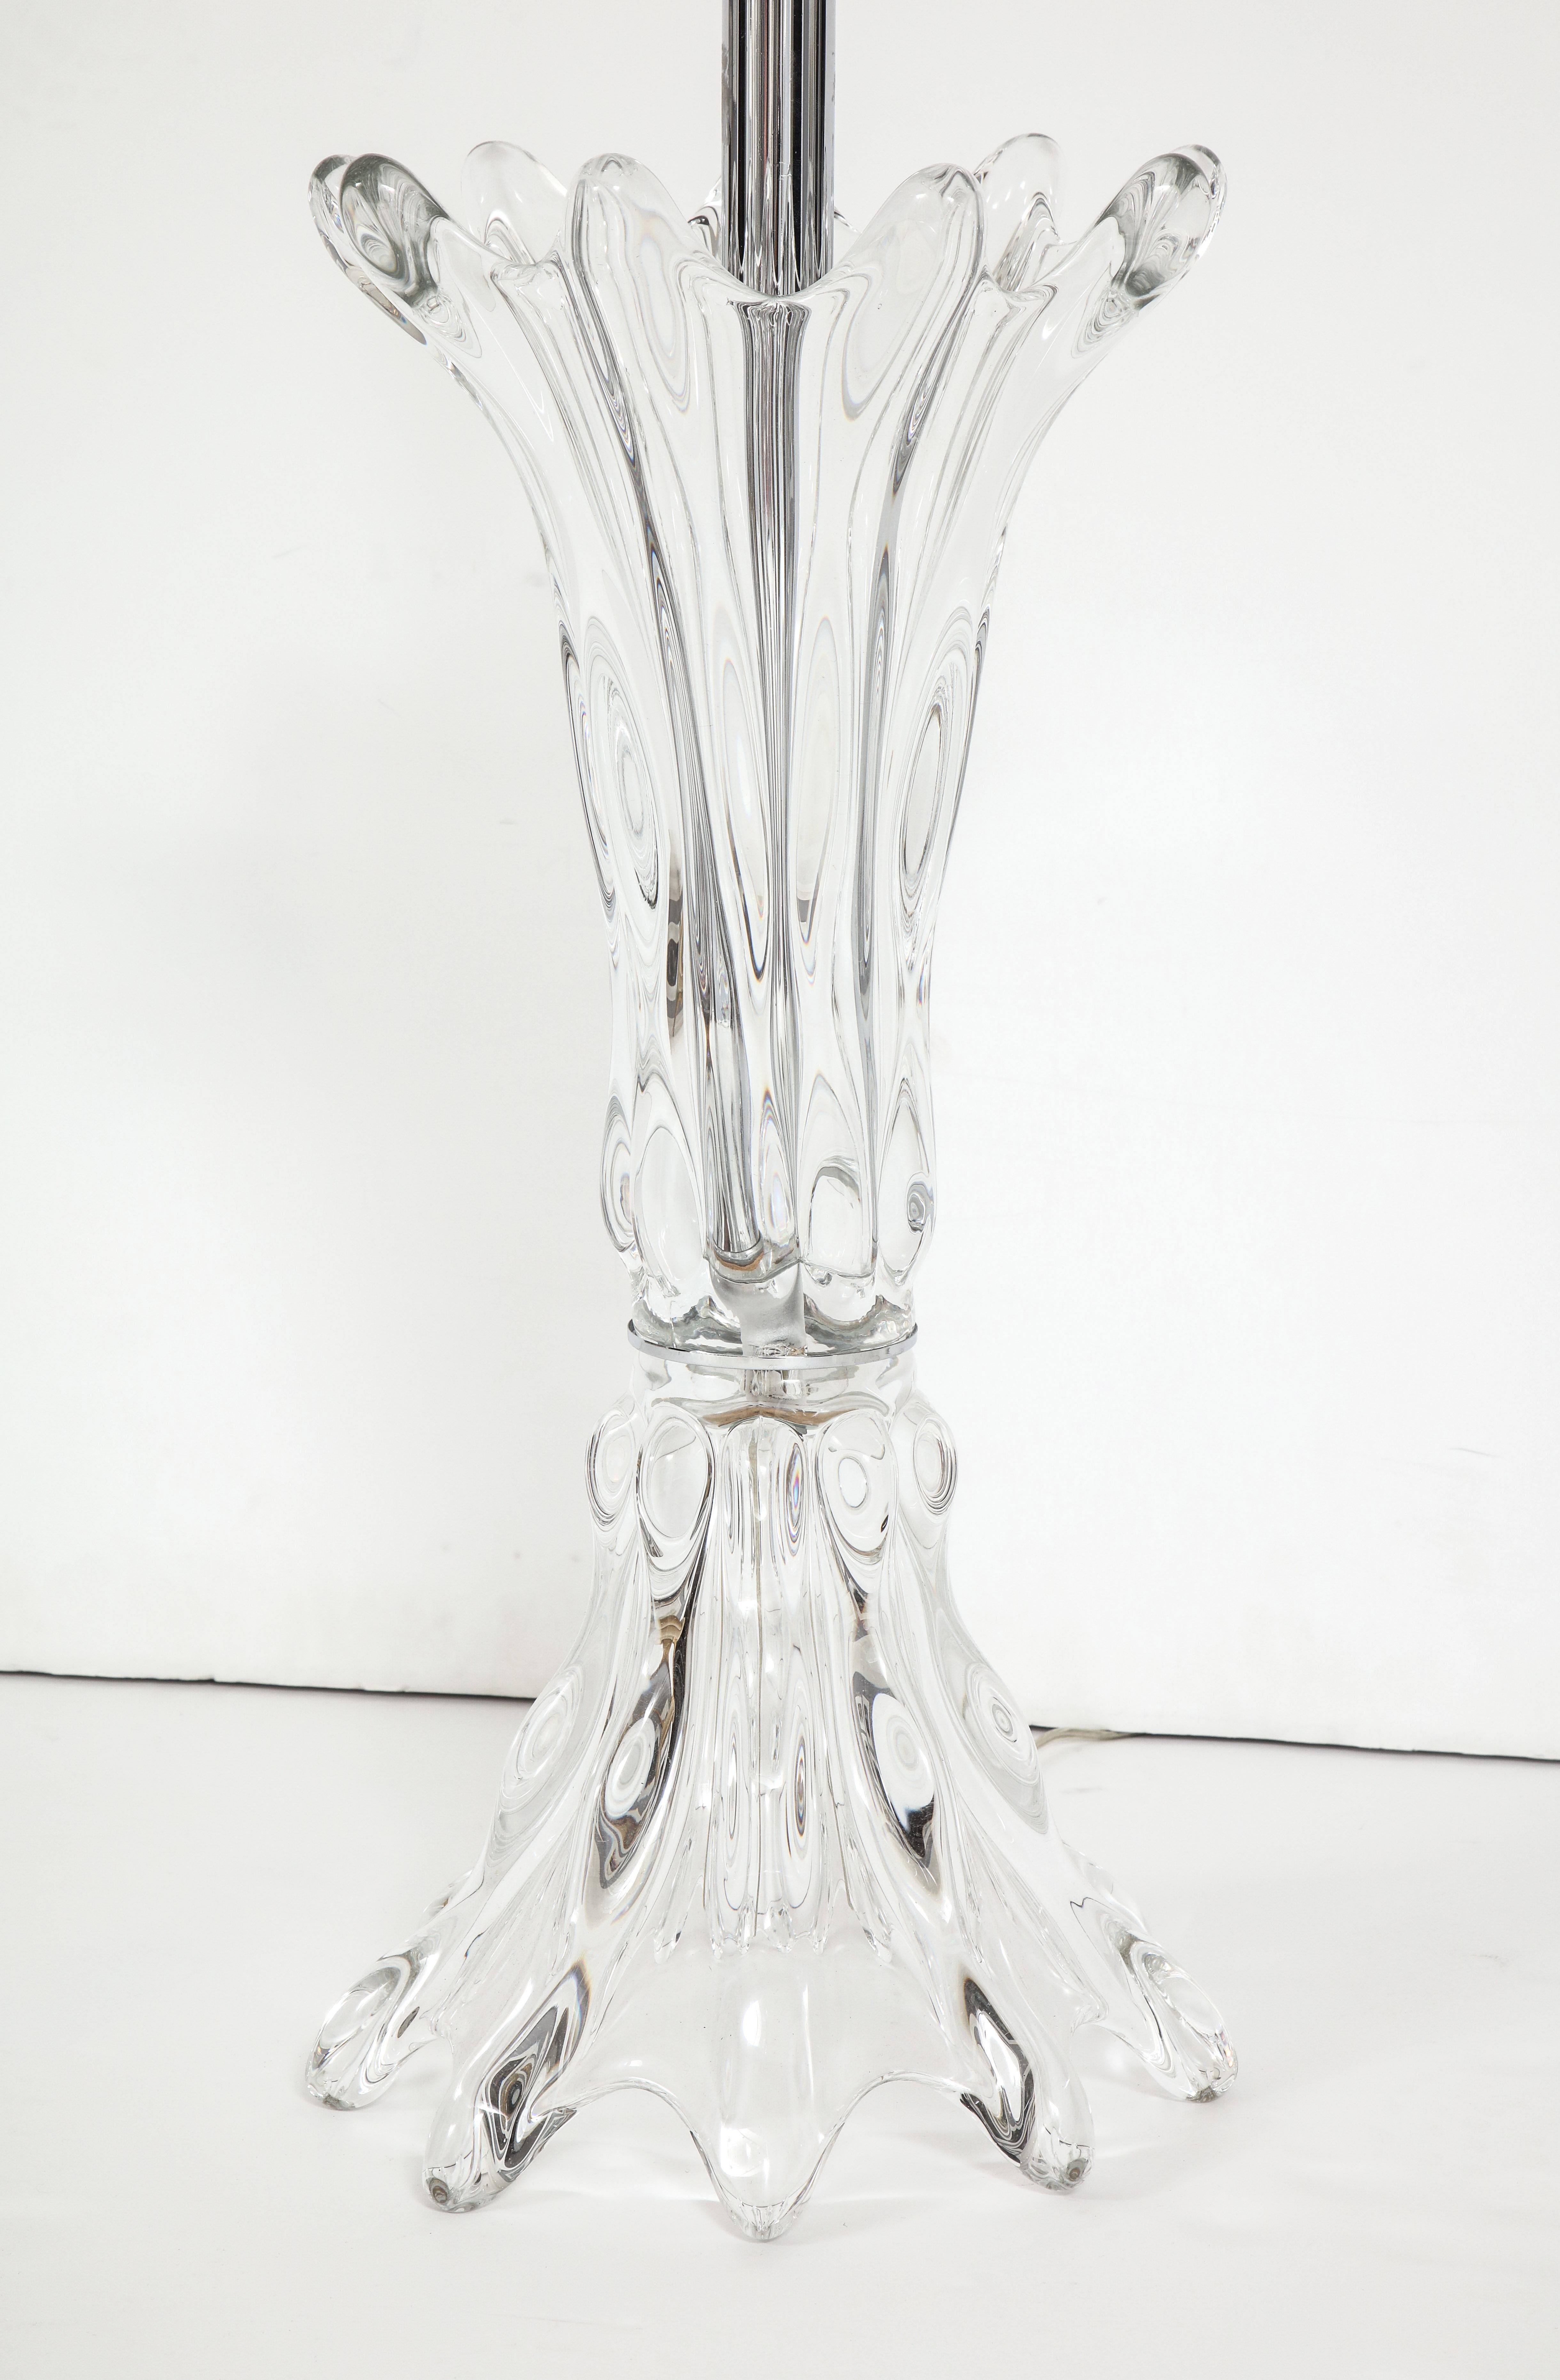 A large-scale, dramatic clear Murano glass table lamp. Perfect as a statement piece in a front entrance! It's sculptural qualities make it a piece of art as well as a lamp.